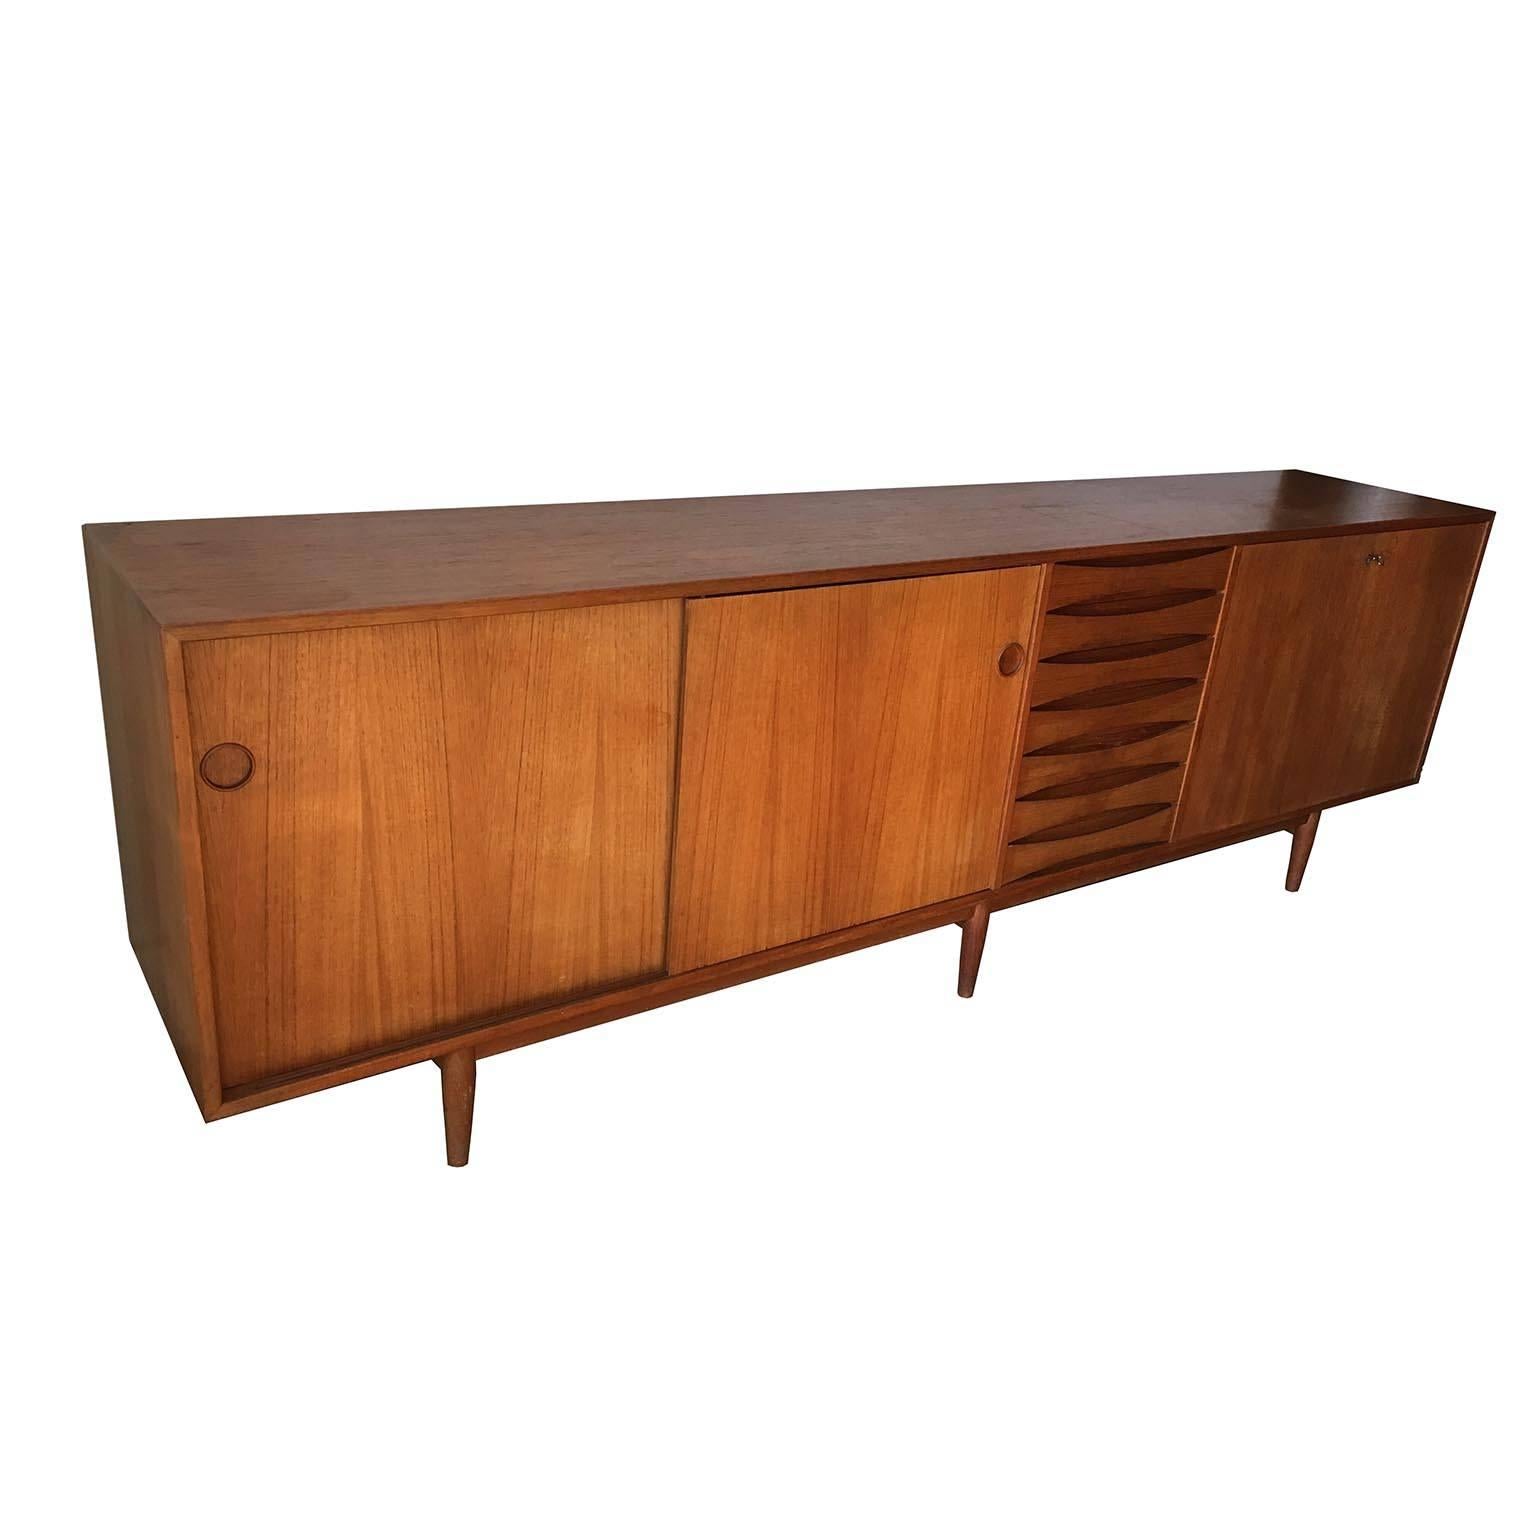 Credenza model 29A, in teak and wood, by Arne Vodder for P. Olsen Sibast MÃ¸bler, Denmark, 1959. Beautiful details can be found on this sideboard, for example, the characteristic drawers and the handles. Highly versatile item with plenty of storage